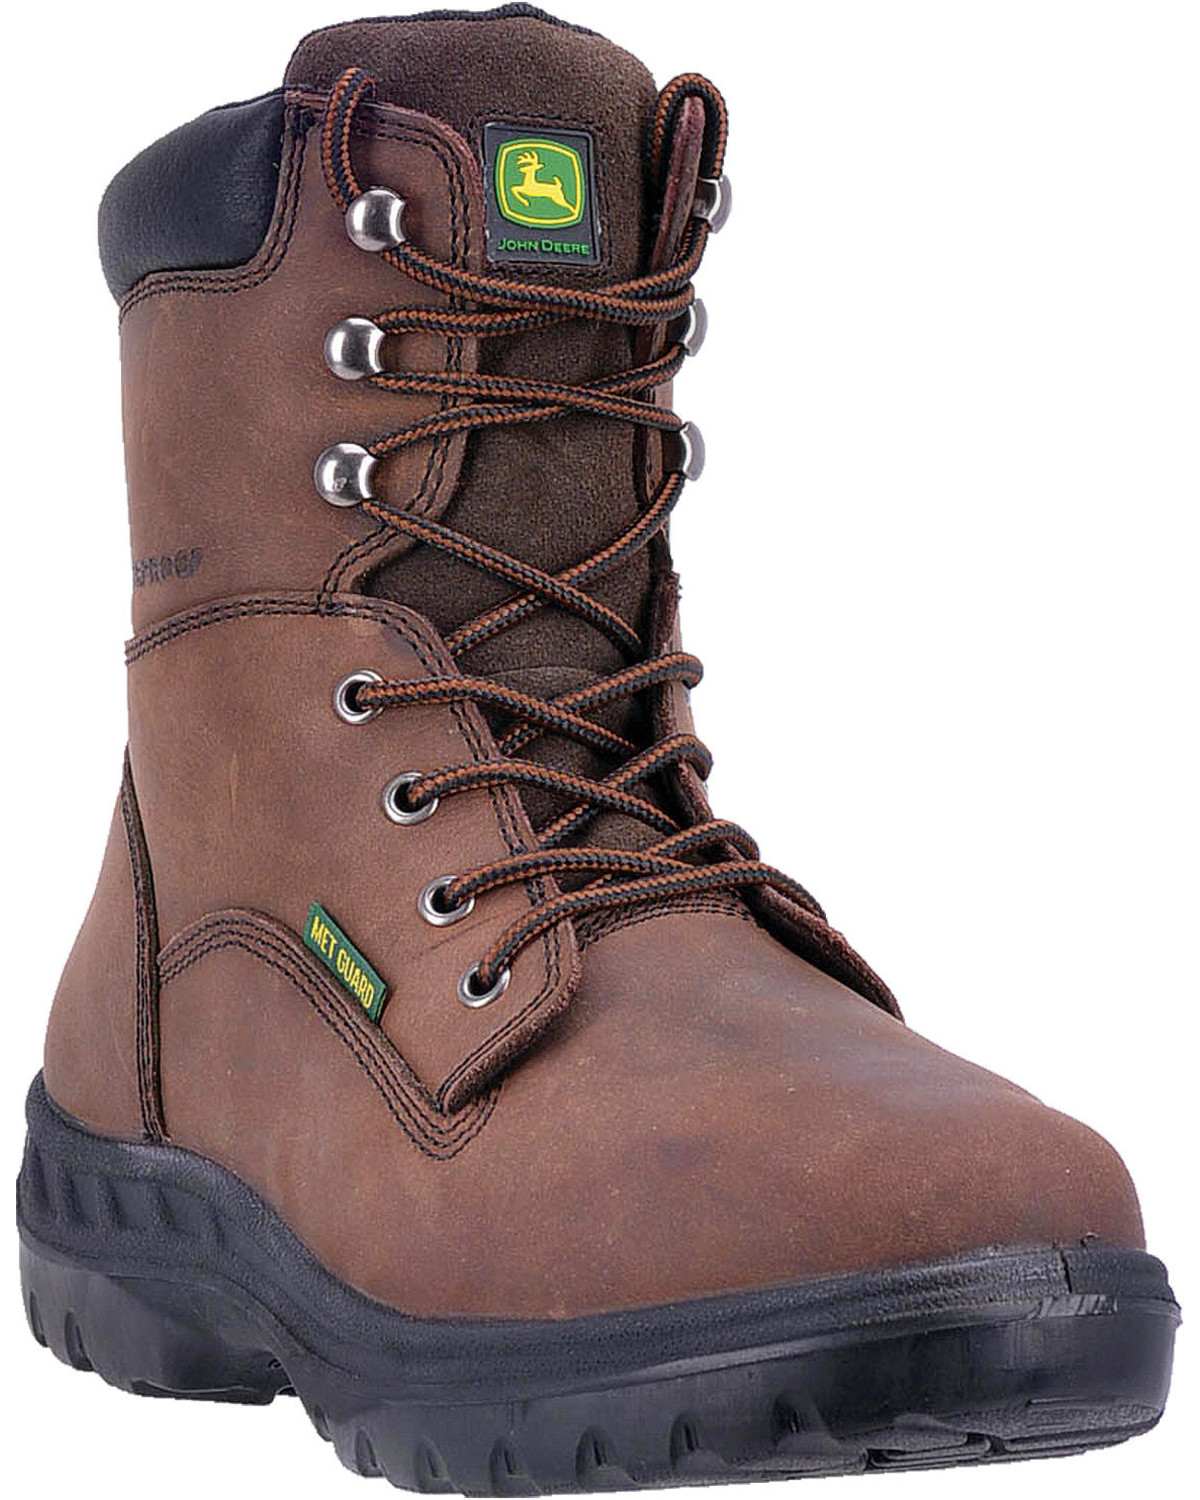 steel toe boots with metatarsal guard